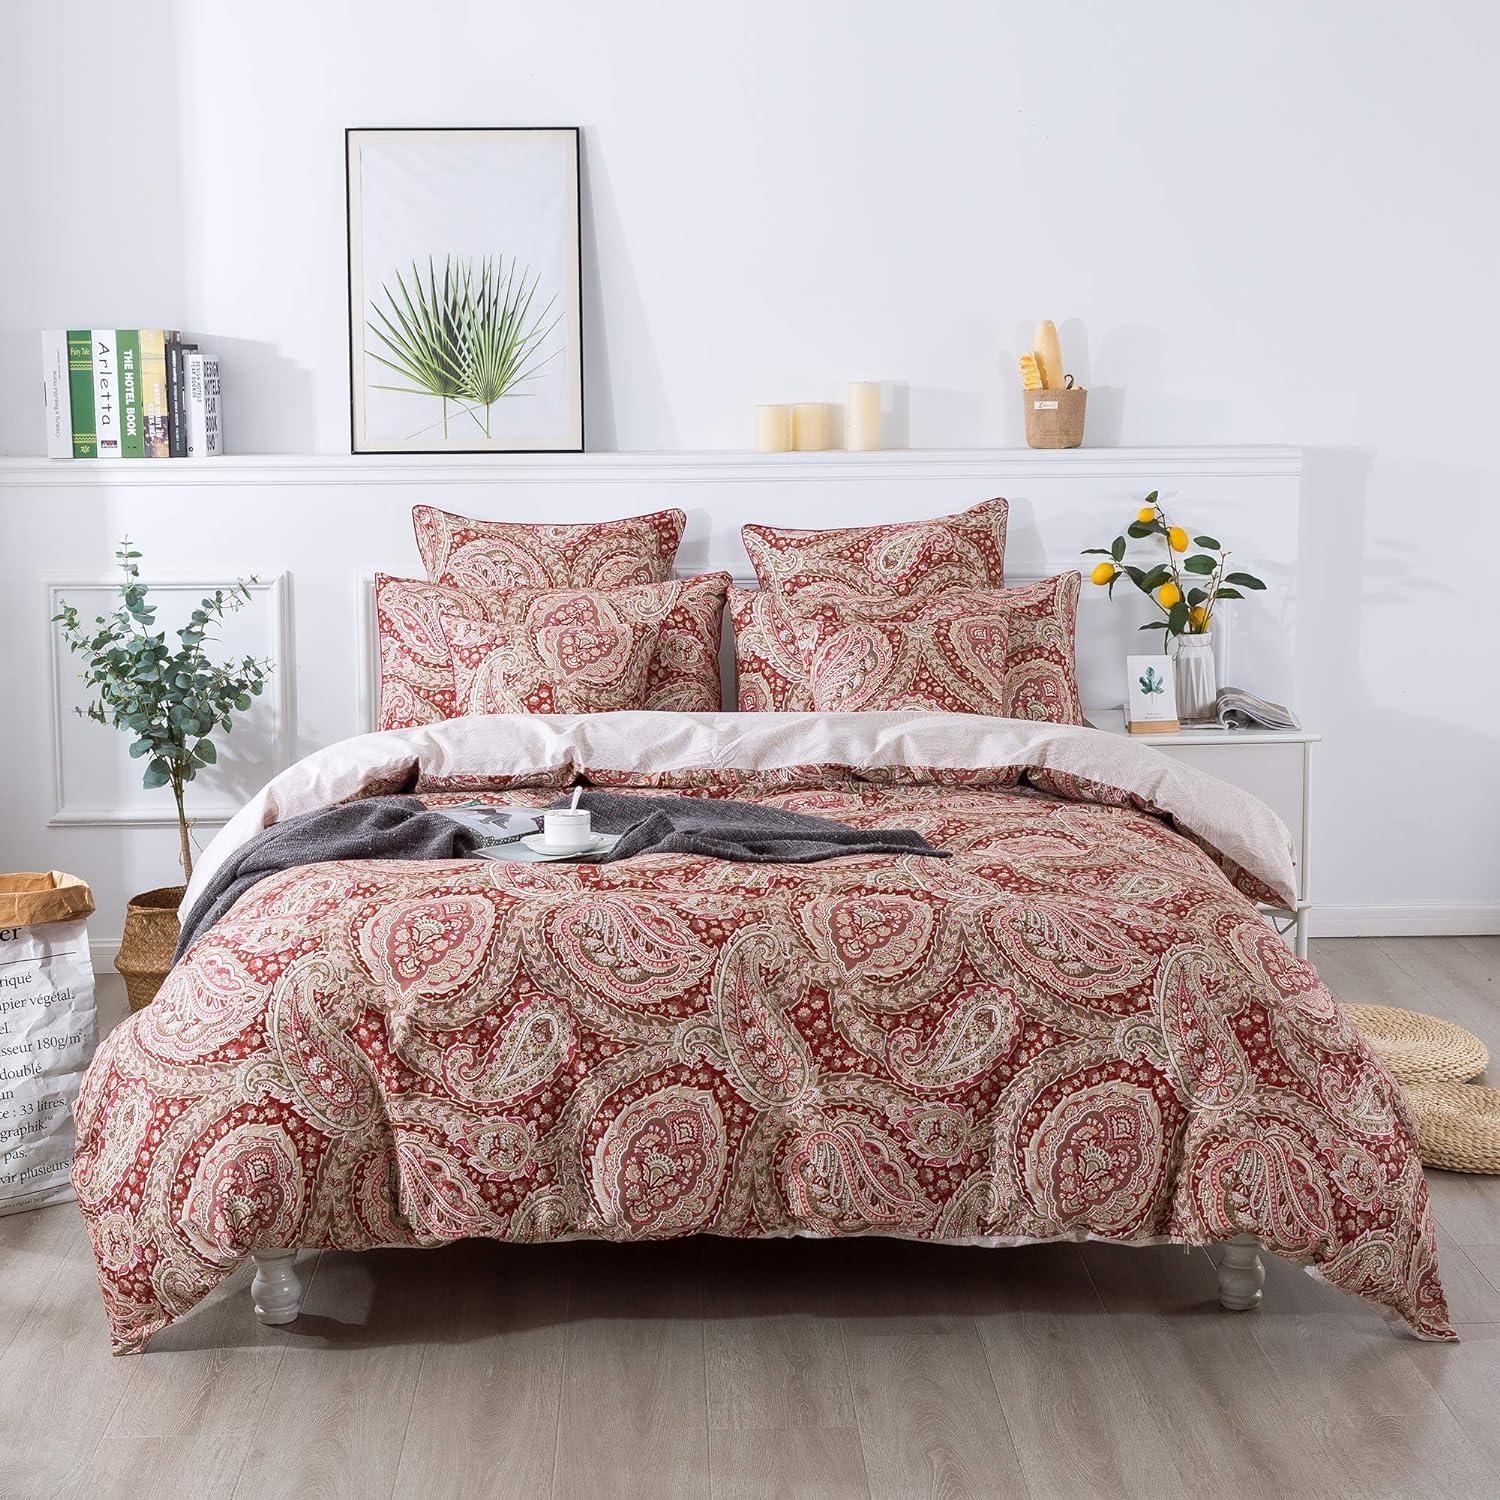 FADFAY Paisley Duvet Cover Set Queen Red and Beige Reversible Paisley Floral Bedding 100% Cotton Ultra Soft Bedding Set with Hidden Zipper Closure 3 Pieces, 1Duvet Cover & 2Pillowcases,Queen Size